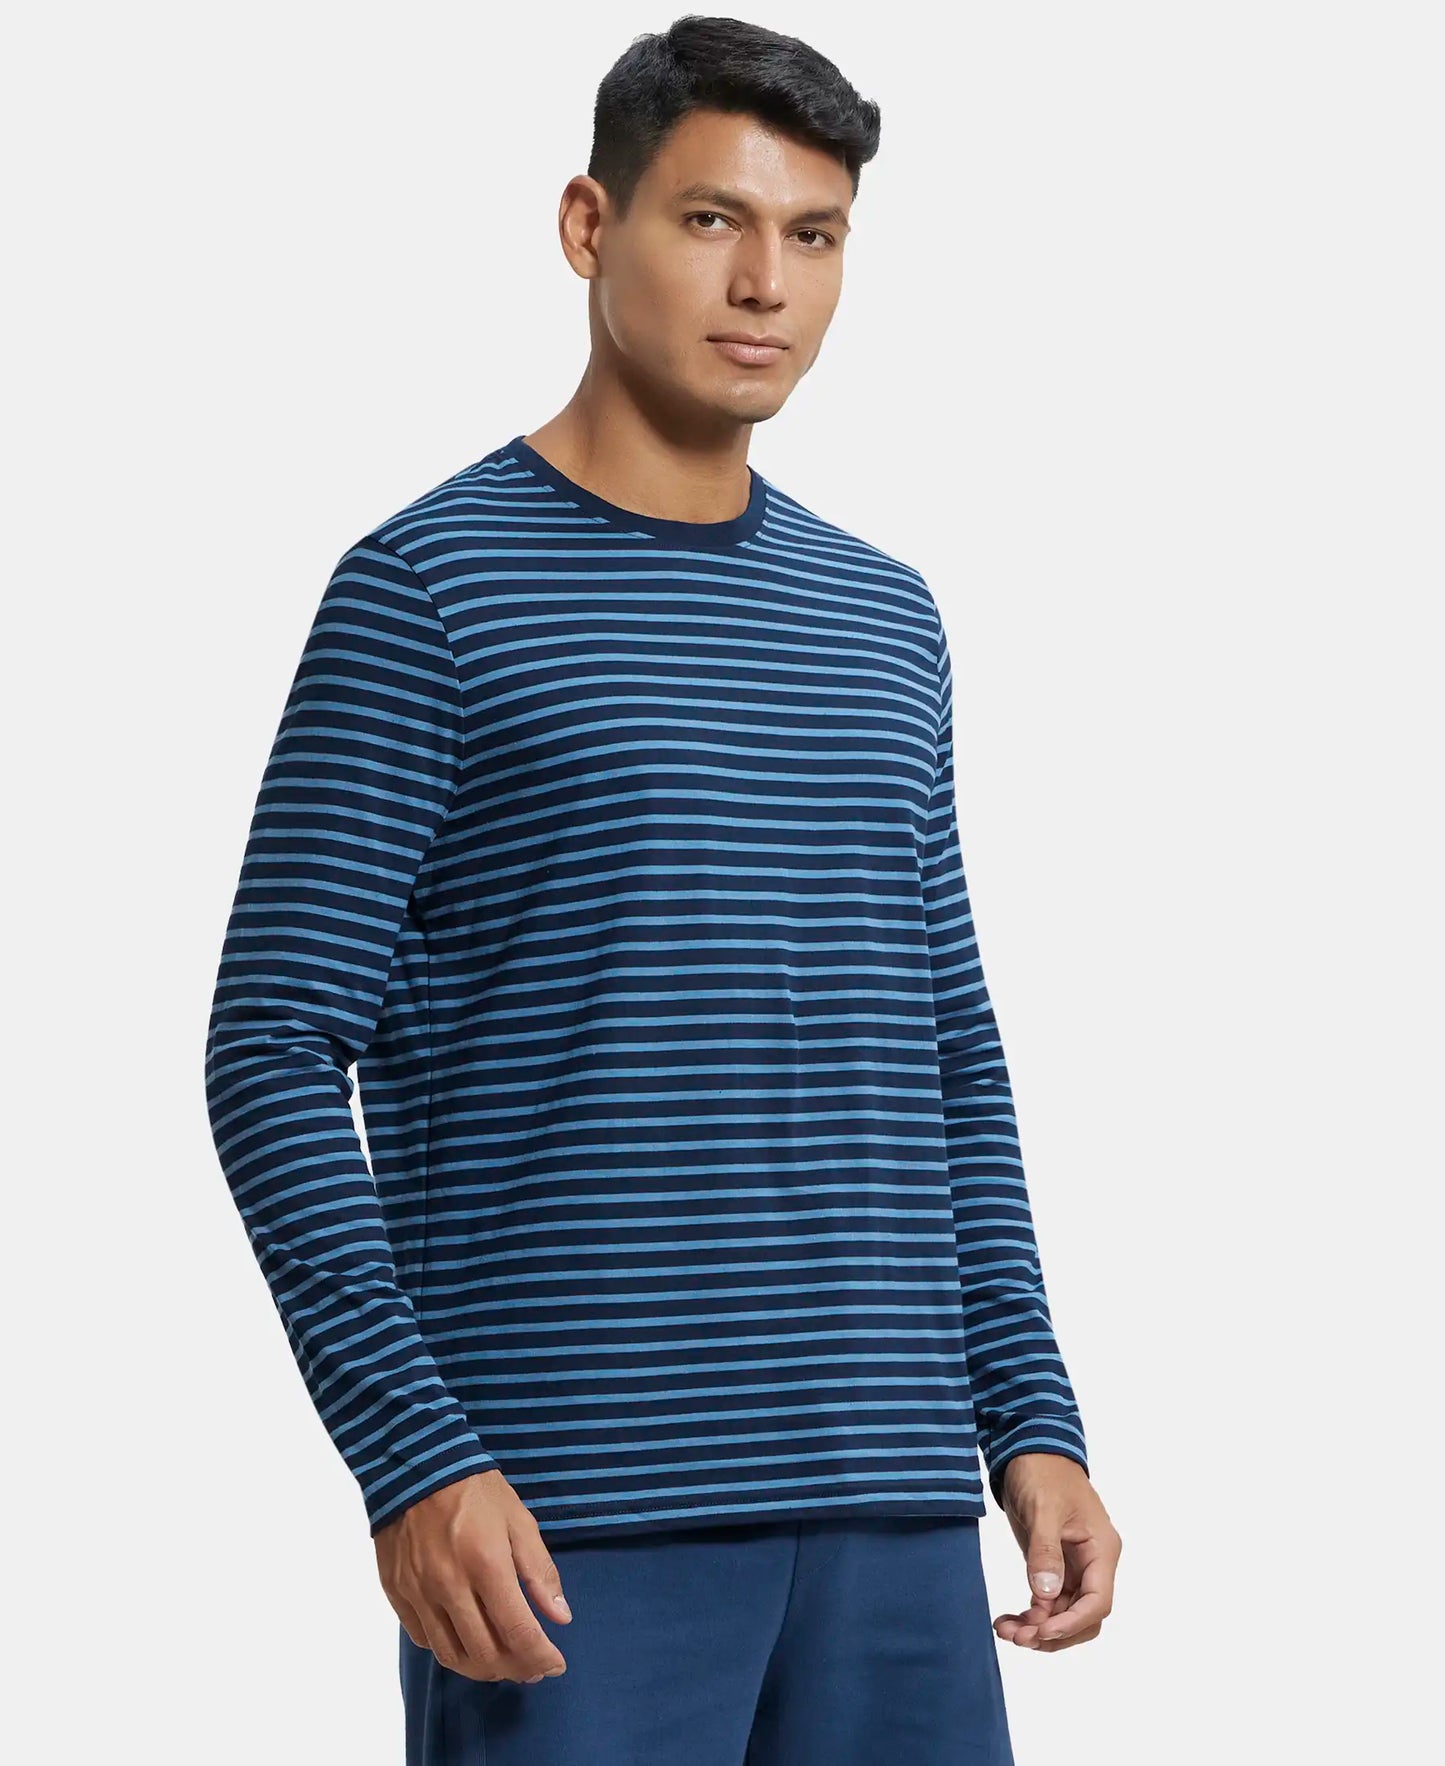 Super Combed Cotton Rich Striped Round Neck Full Sleeve T-Shirt - Navy Seaport Teal-2